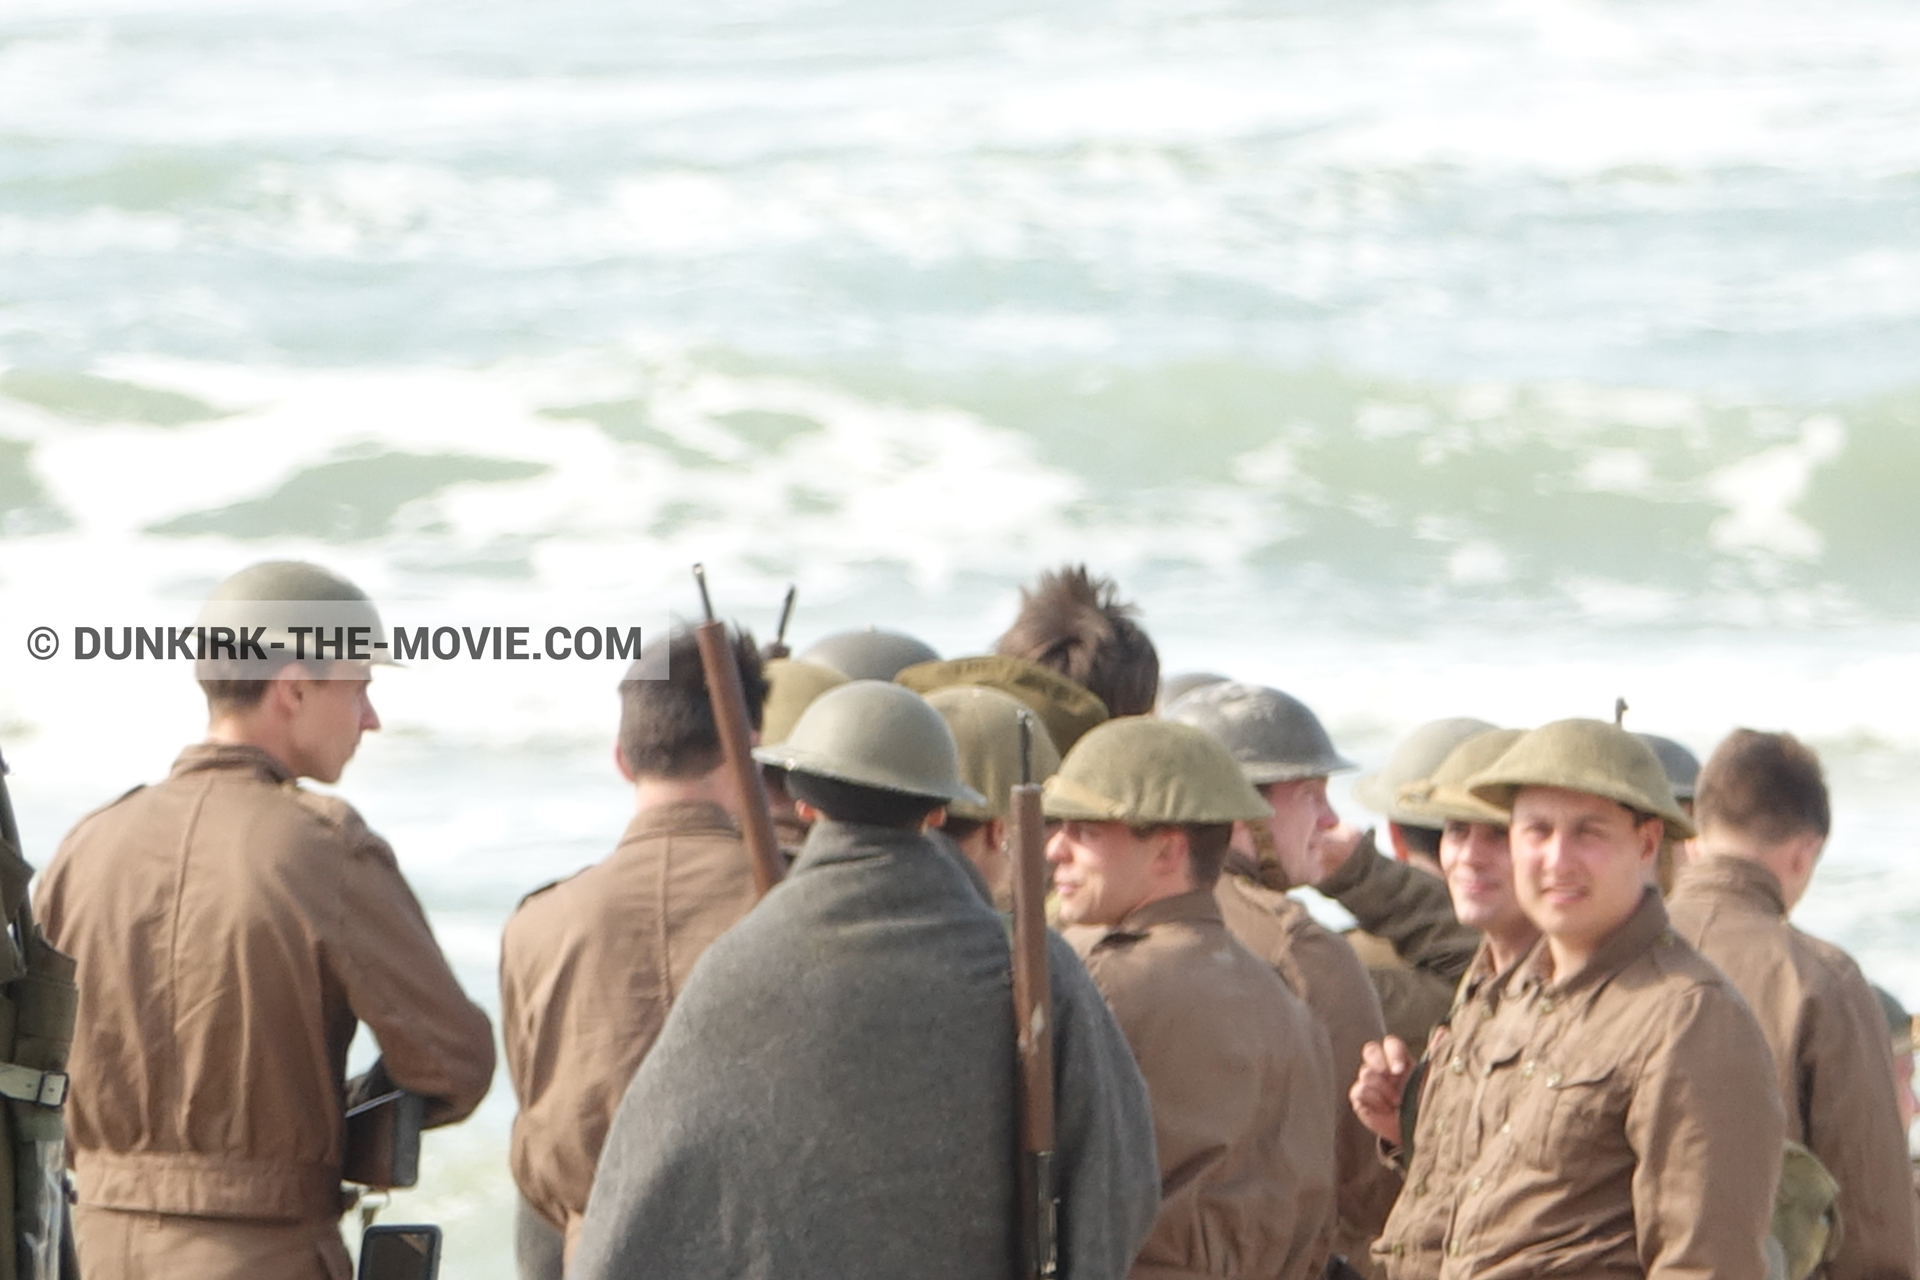 Picture with supernumeraries, rough sea,  from behind the scene of the Dunkirk movie by Nolan